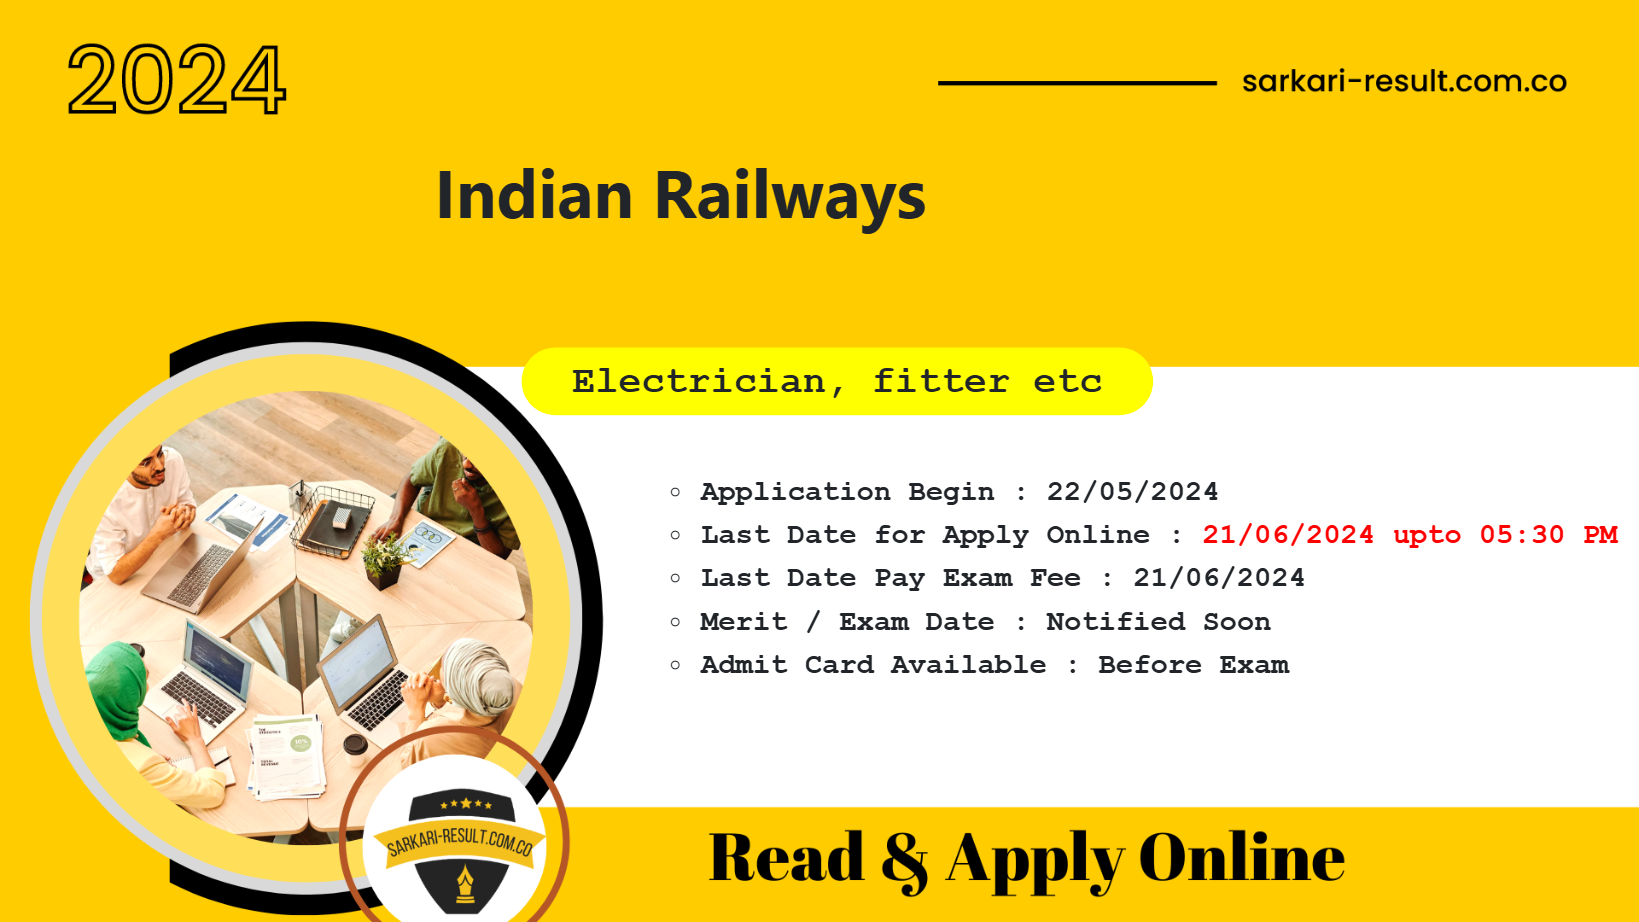 Railway Integral Coach Factory ICF Chennai Various Trade Apprentices 2024 Apply Online for 1010 Post